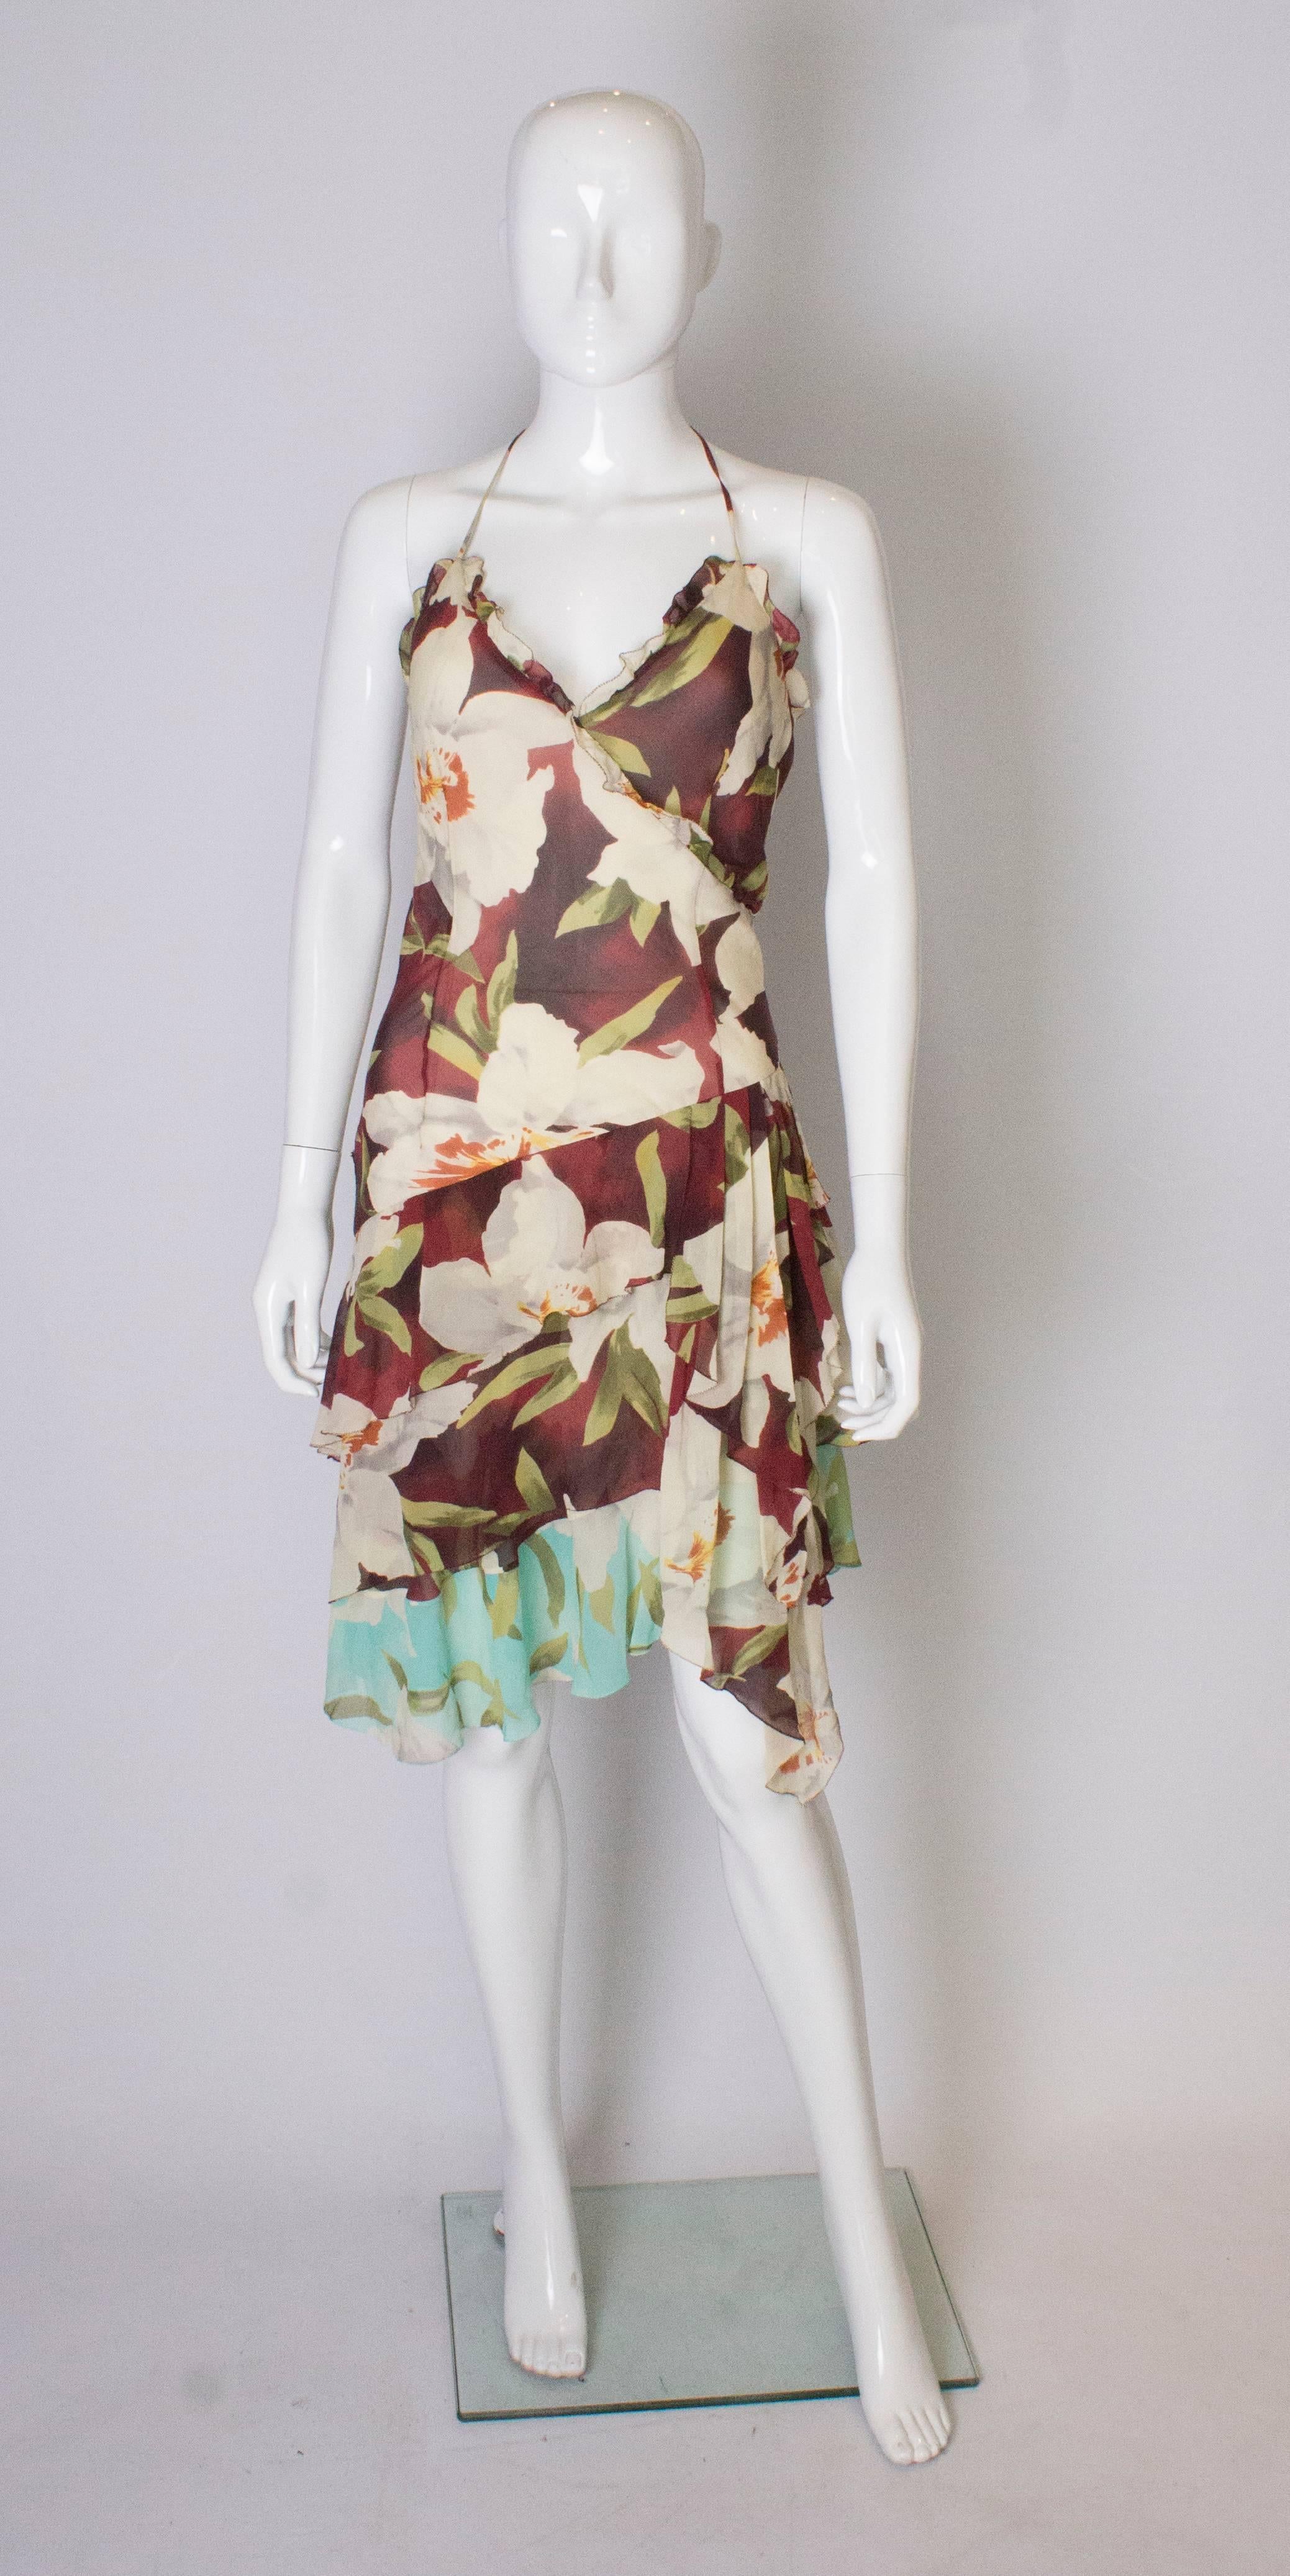 A 1990's pretty, floaty , floral silk dress by Cacharel. The dress is in a floral print with layers of silk,   and has spaghetti straps and a hankerchief hem.  It has a side zip and is fully lined.